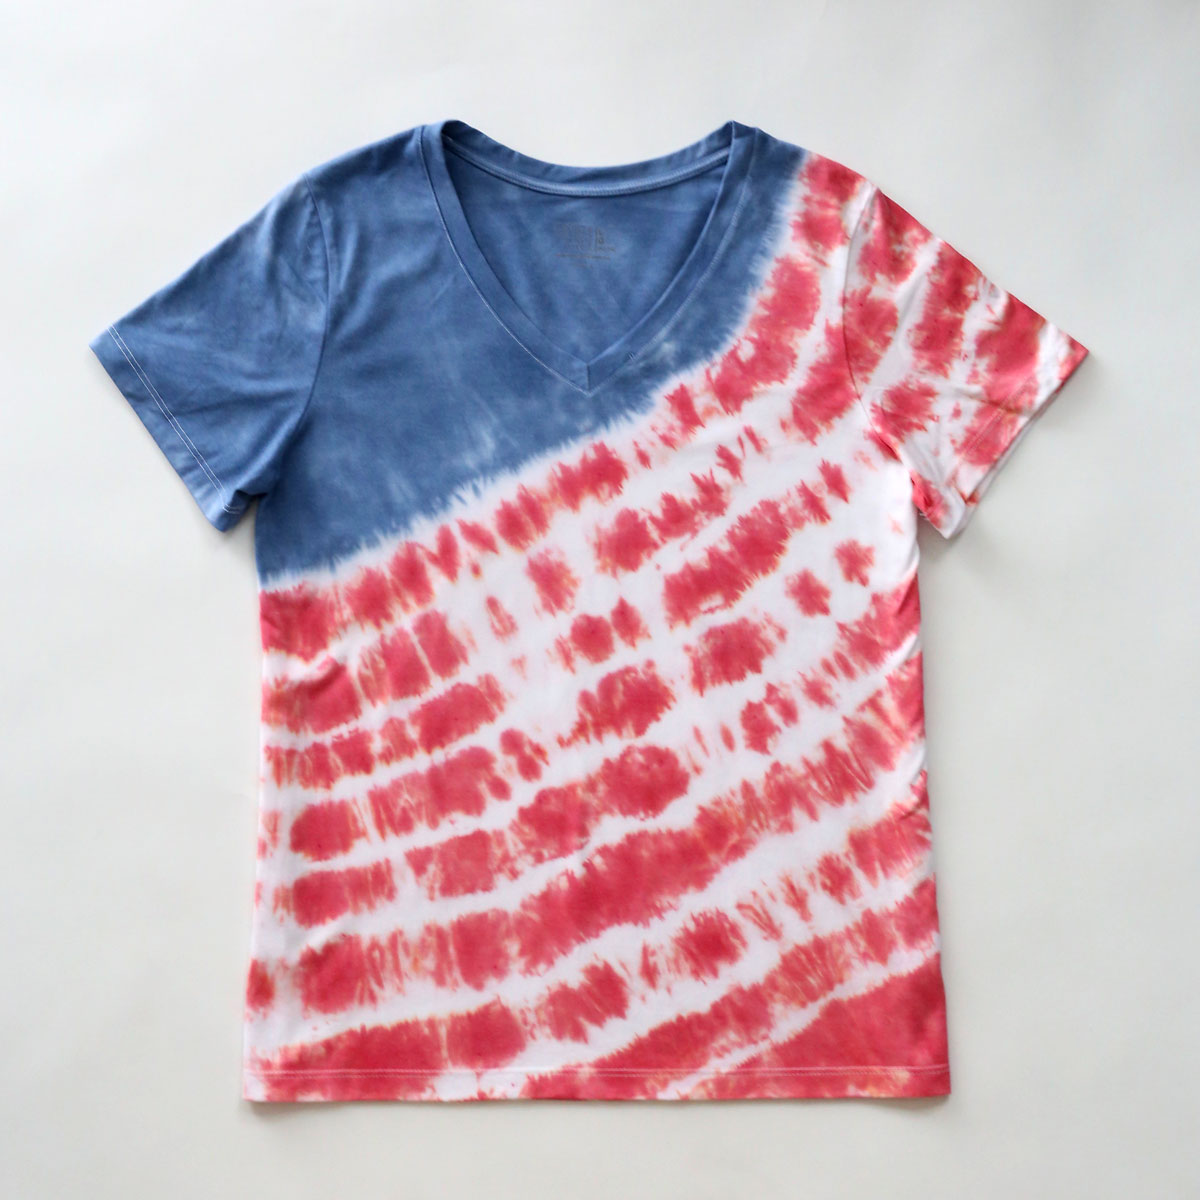 DIY Red, White and Blue Tie Dye Shirt for the Fourth of July - It's Always  Autumn